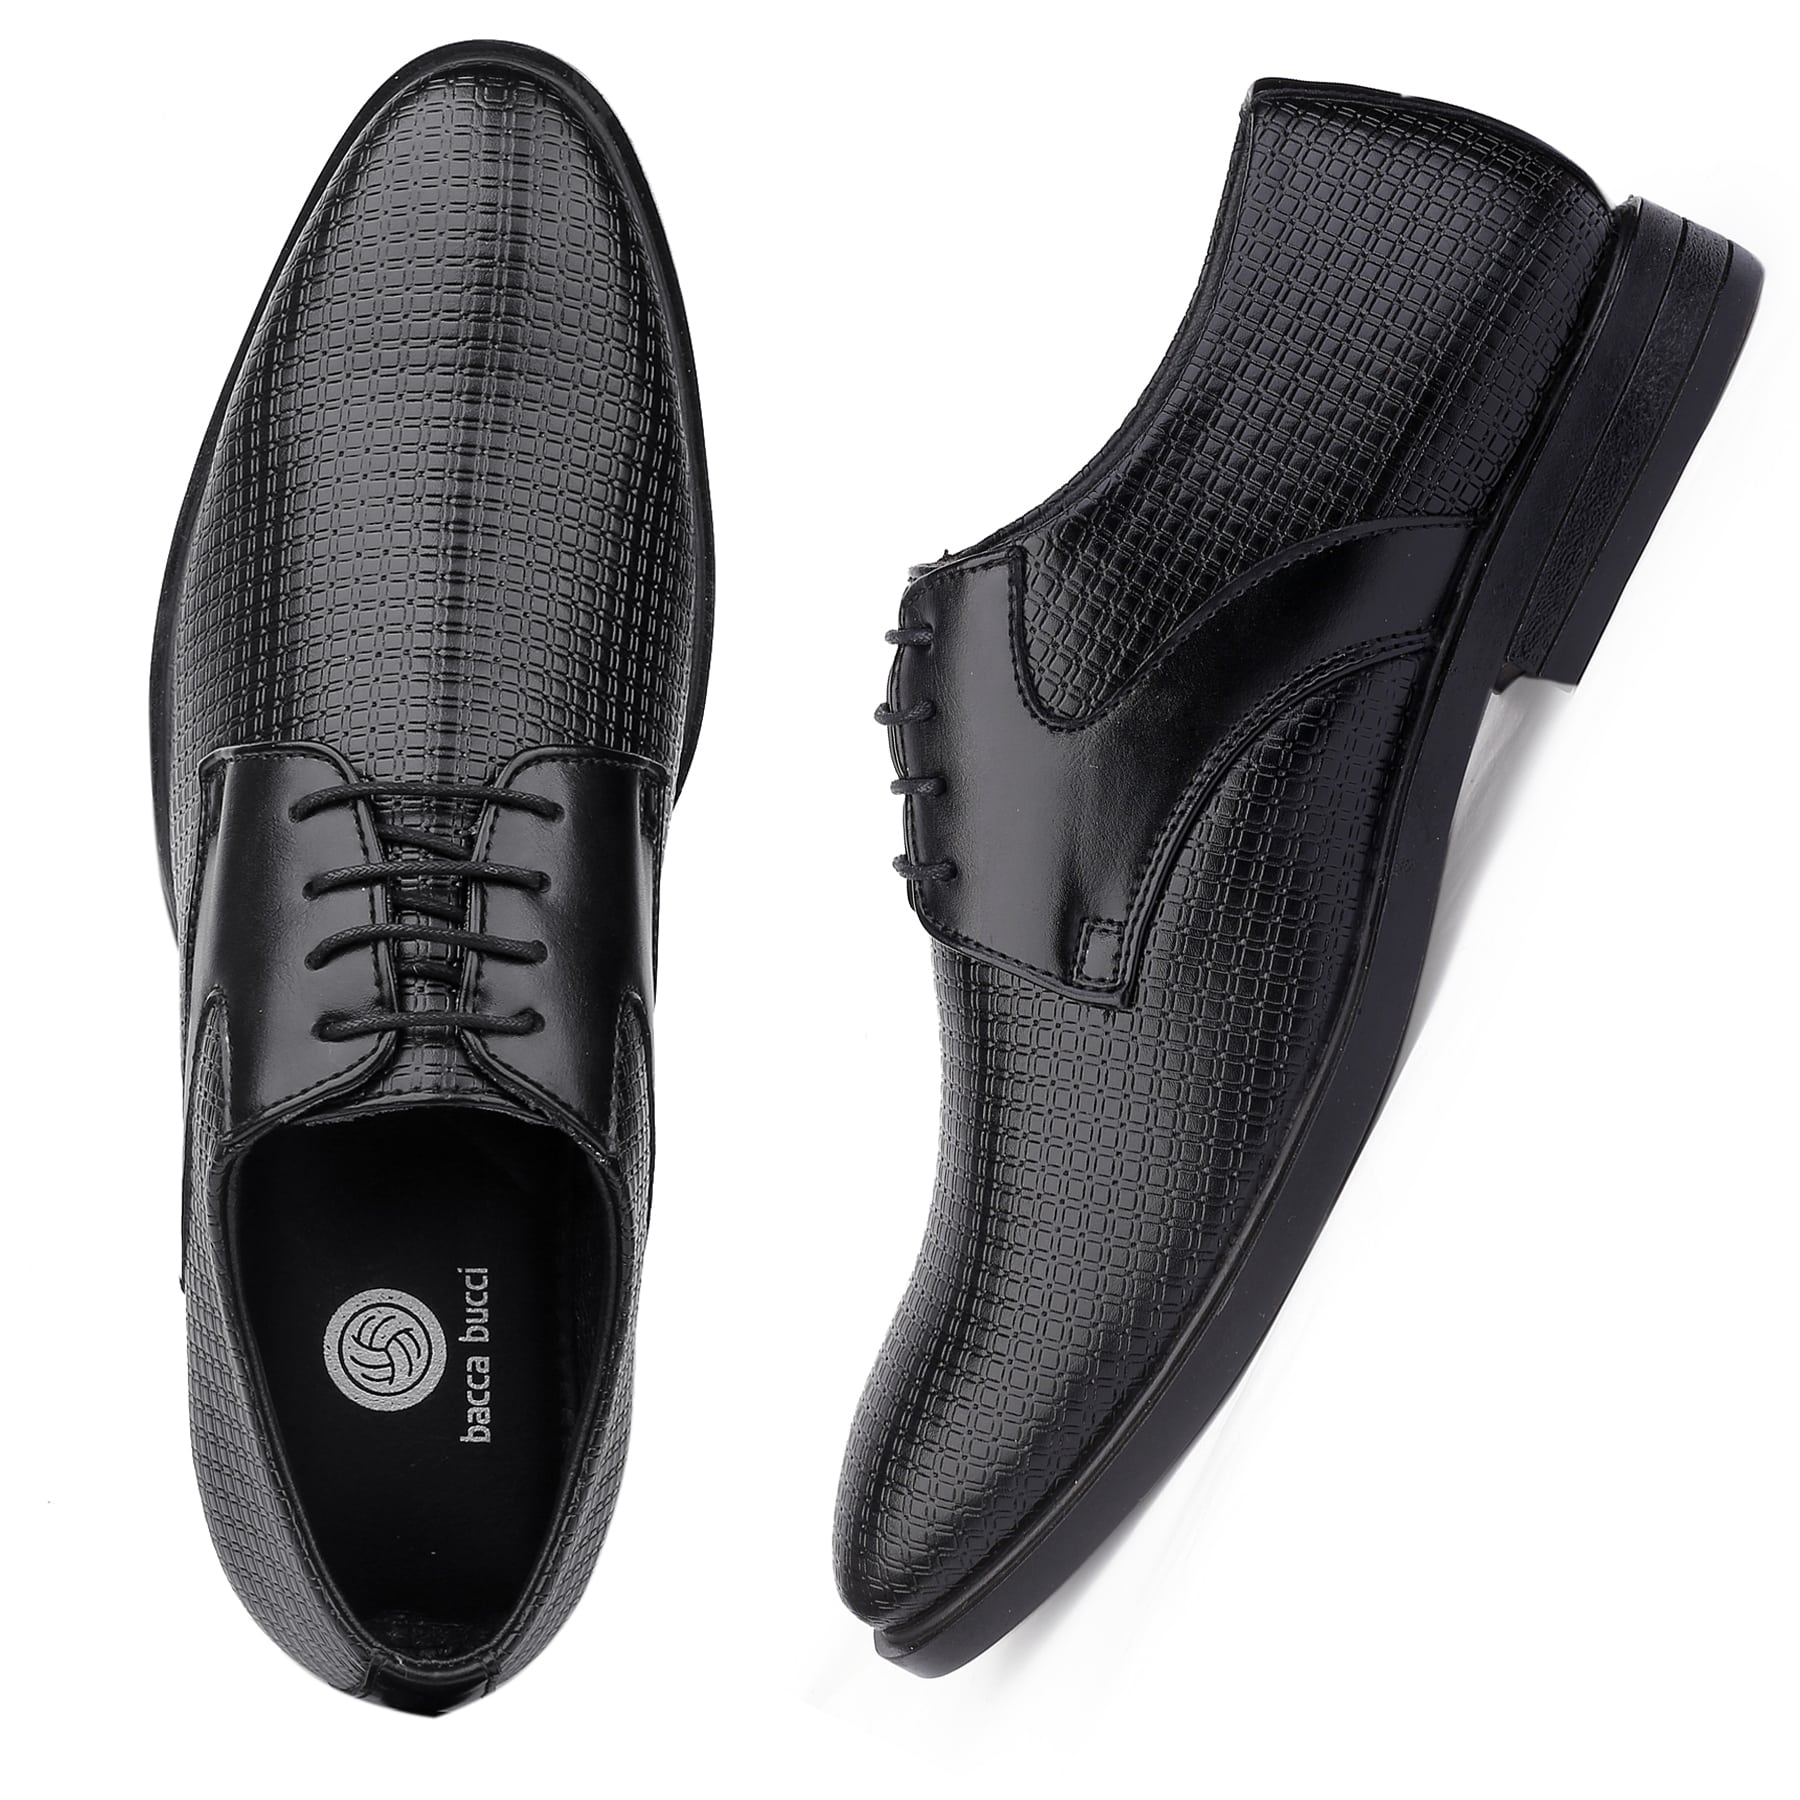 Bacca Bucci OSLO Formal Shoes with Superior Comfort |  All Day Wear Office Or Party Lace-up Shoes